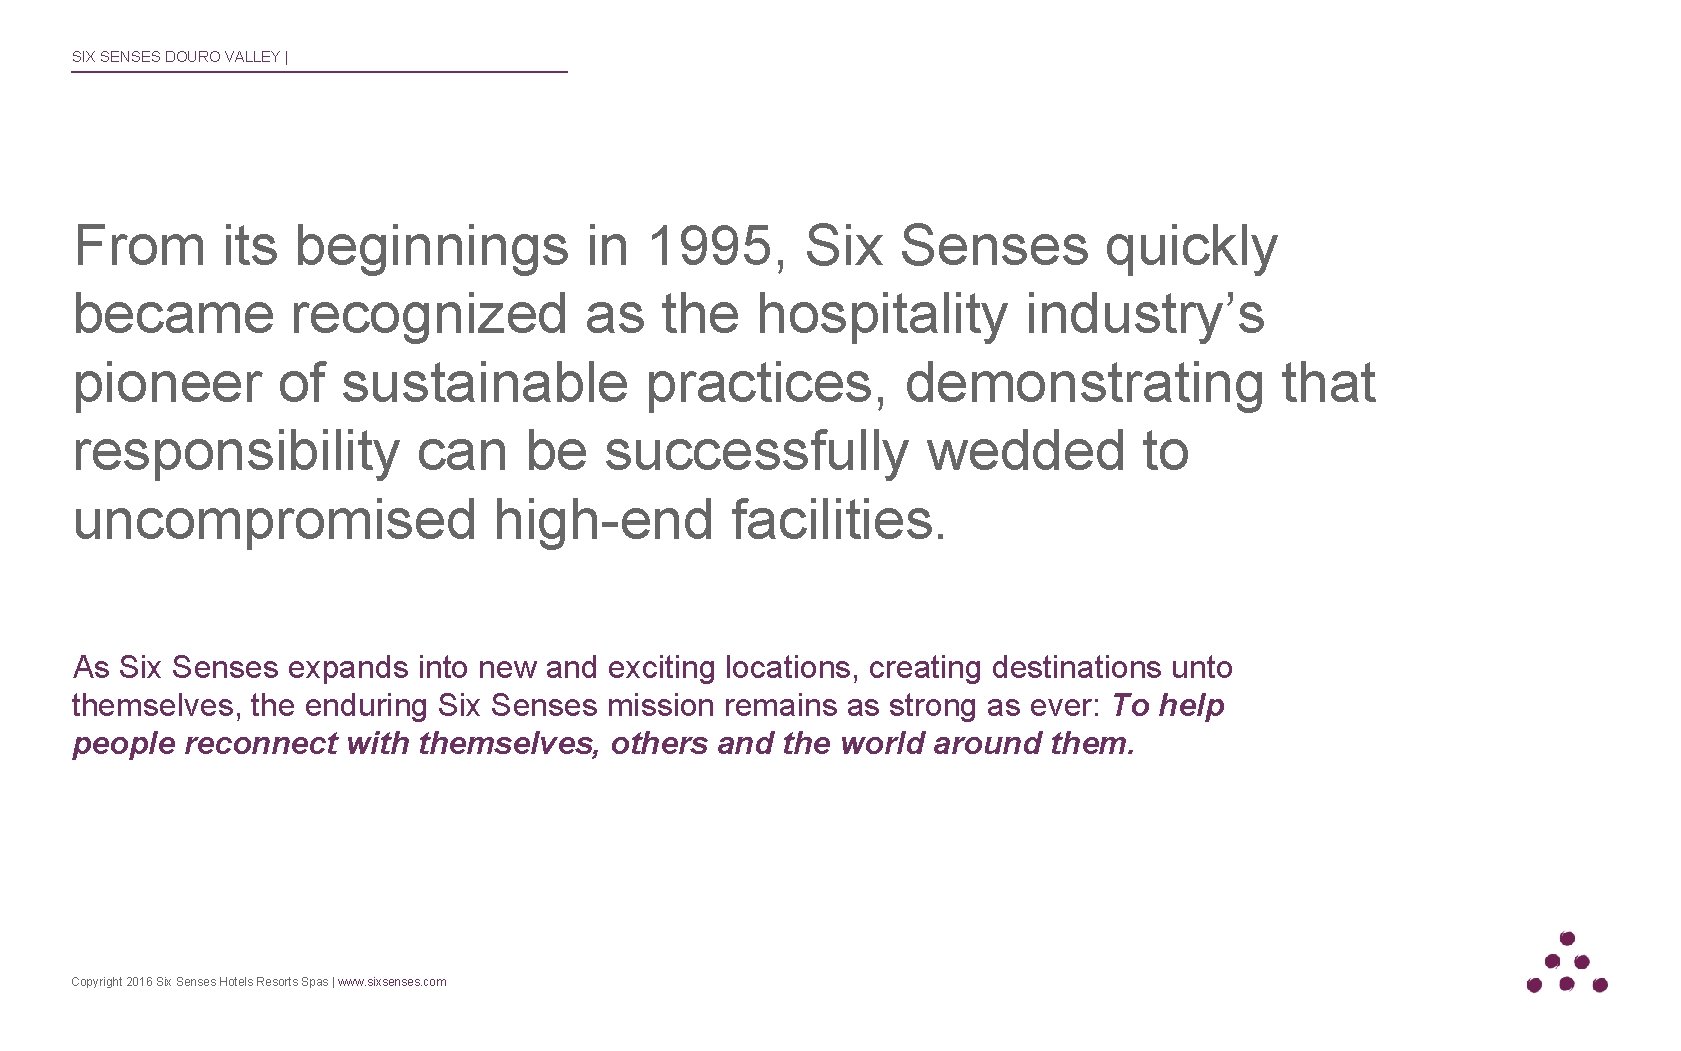 SIX SENSES DOURO VALLEY | From its beginnings in 1995, Six Senses quickly became